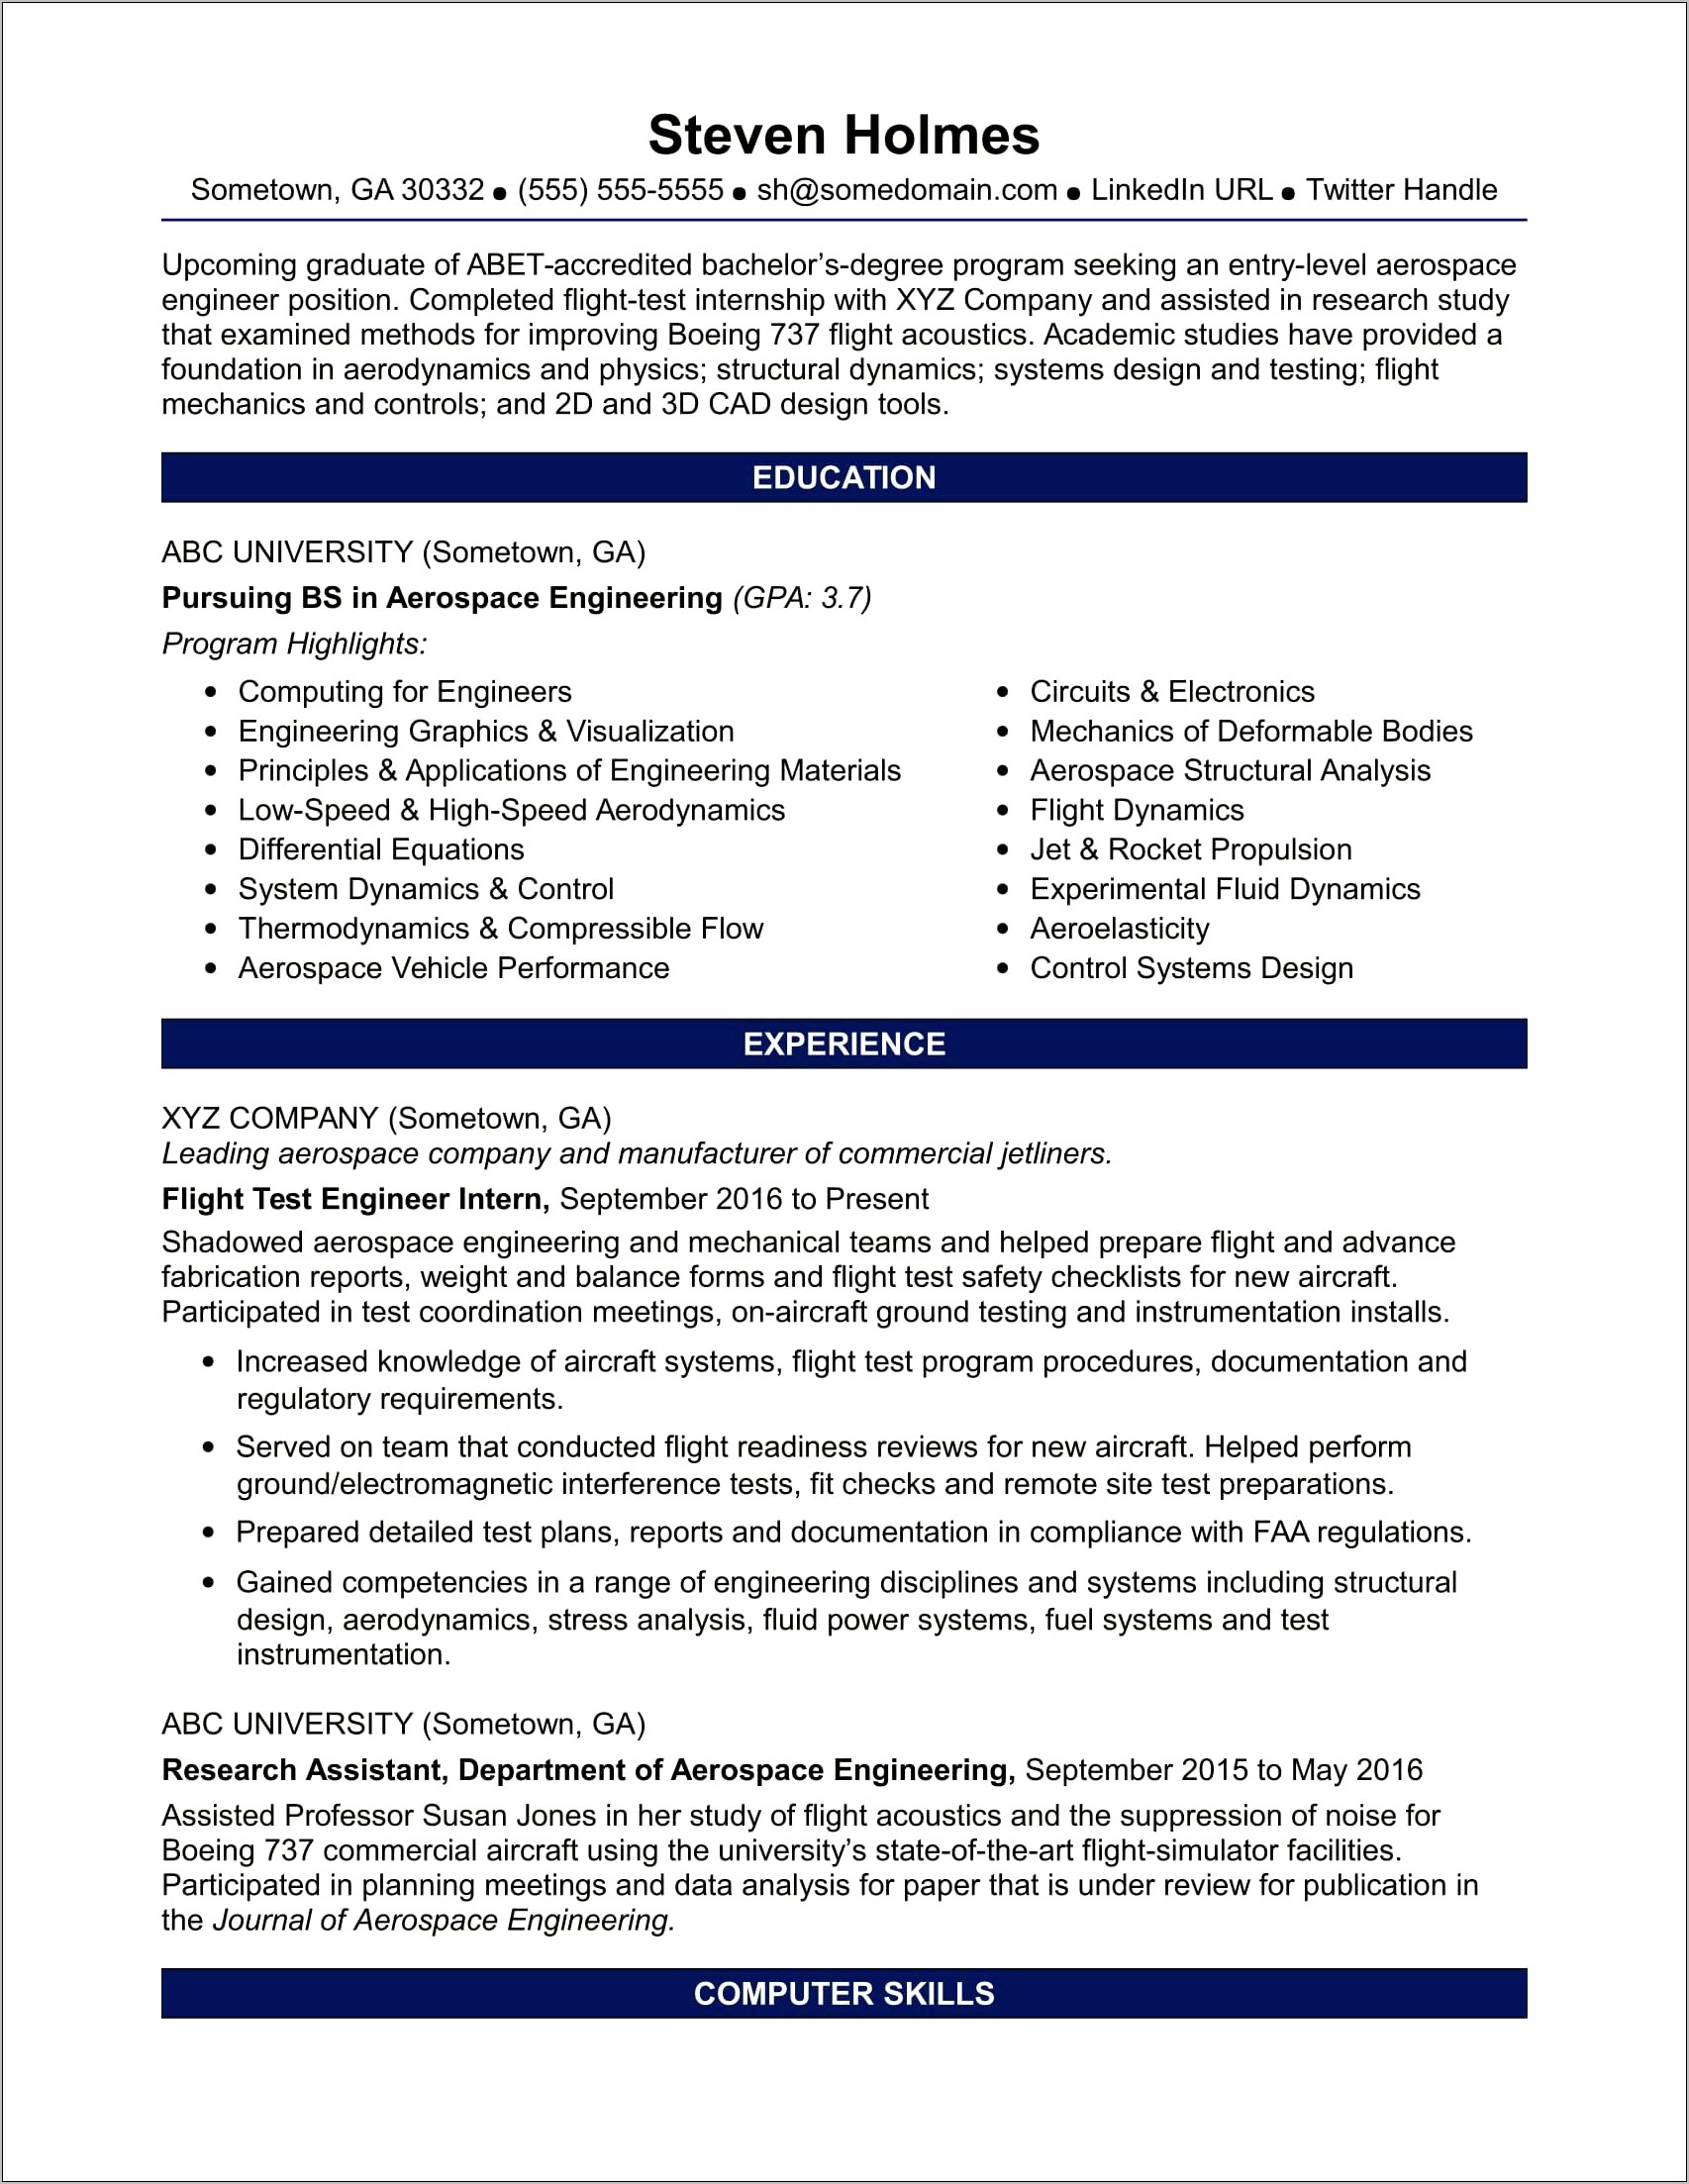 Engineering Resume Objective Or Cover Letter